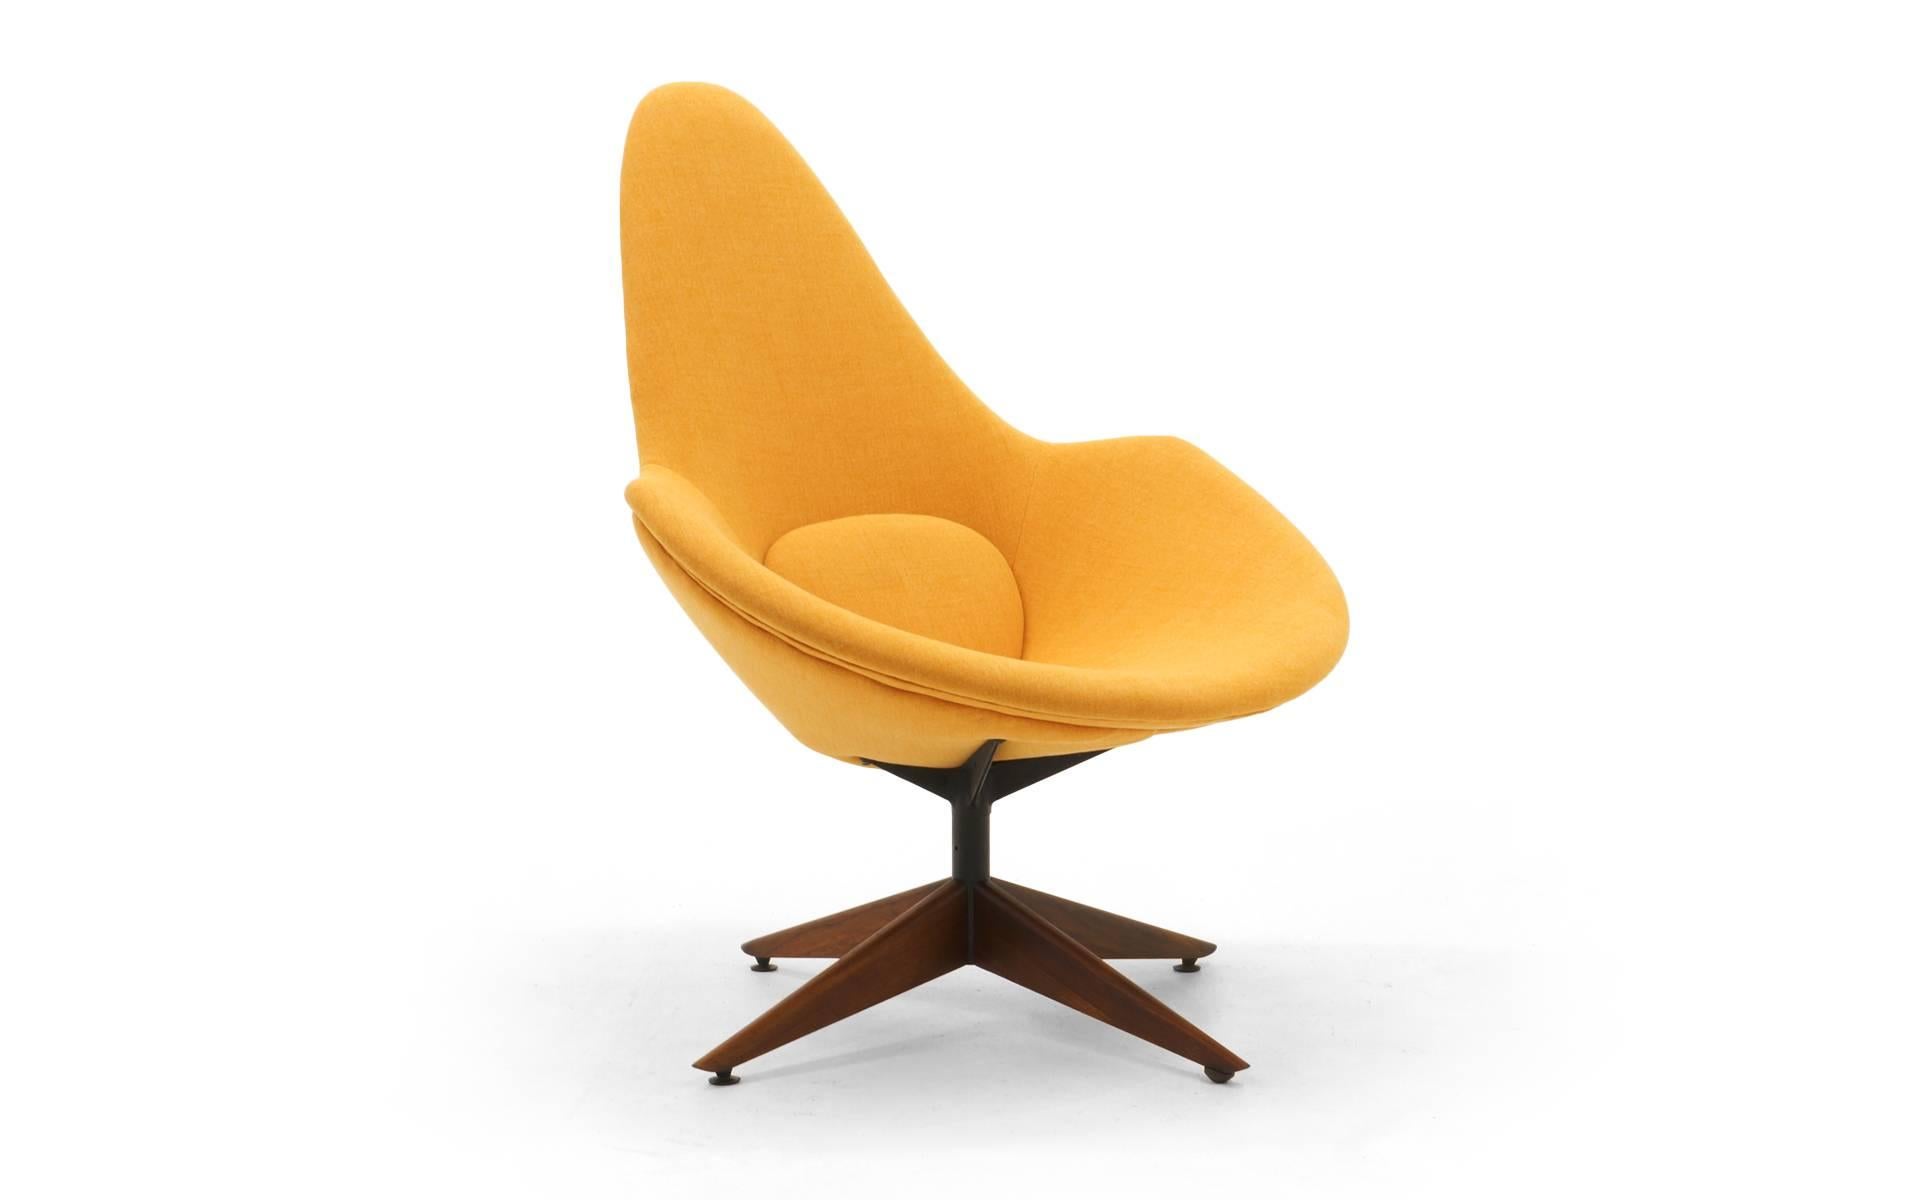 One of the best Adrian Peasall designs we have ever seen. This swivel chair has been completely restored from the inside out. Very comfortable. Mod, organic design. Light peach color Maharam fabric with attached lumbar pillow which is part of the